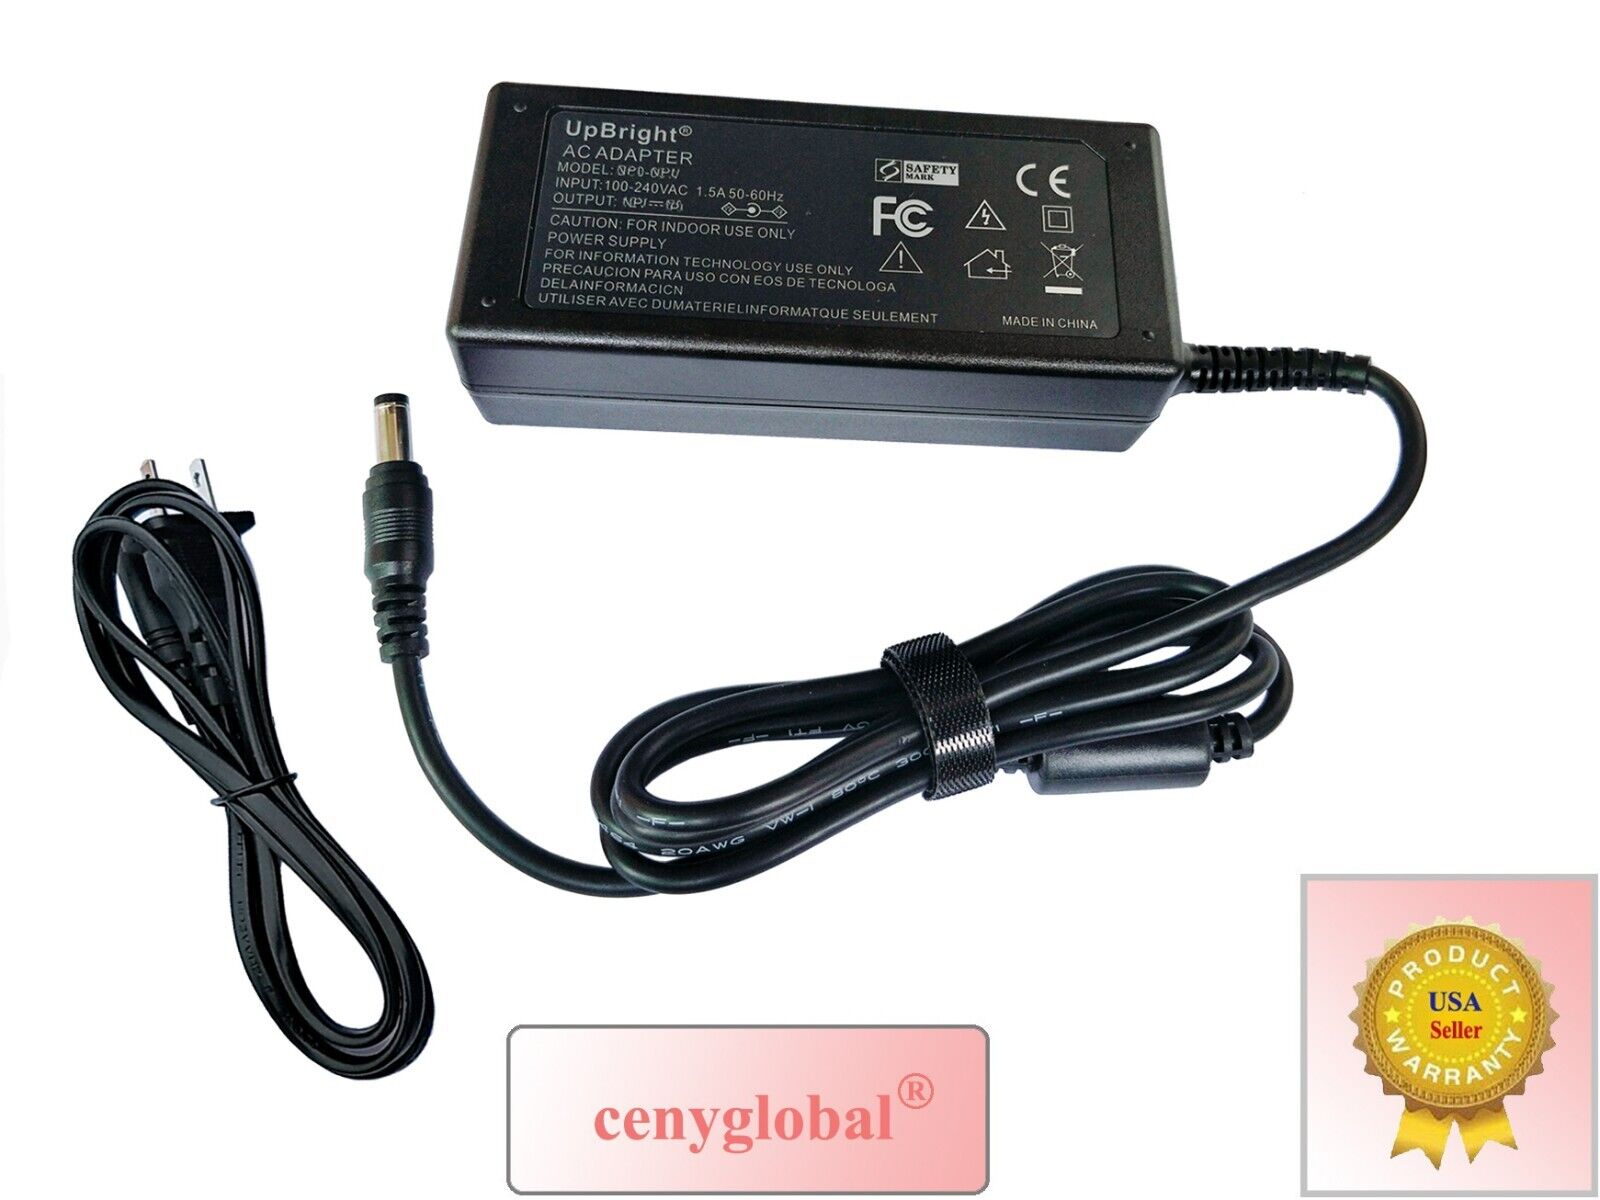 12V AC/DC Adapter For PicoPSU 80 90 120 150 160 Switching Power Charger 110-240v